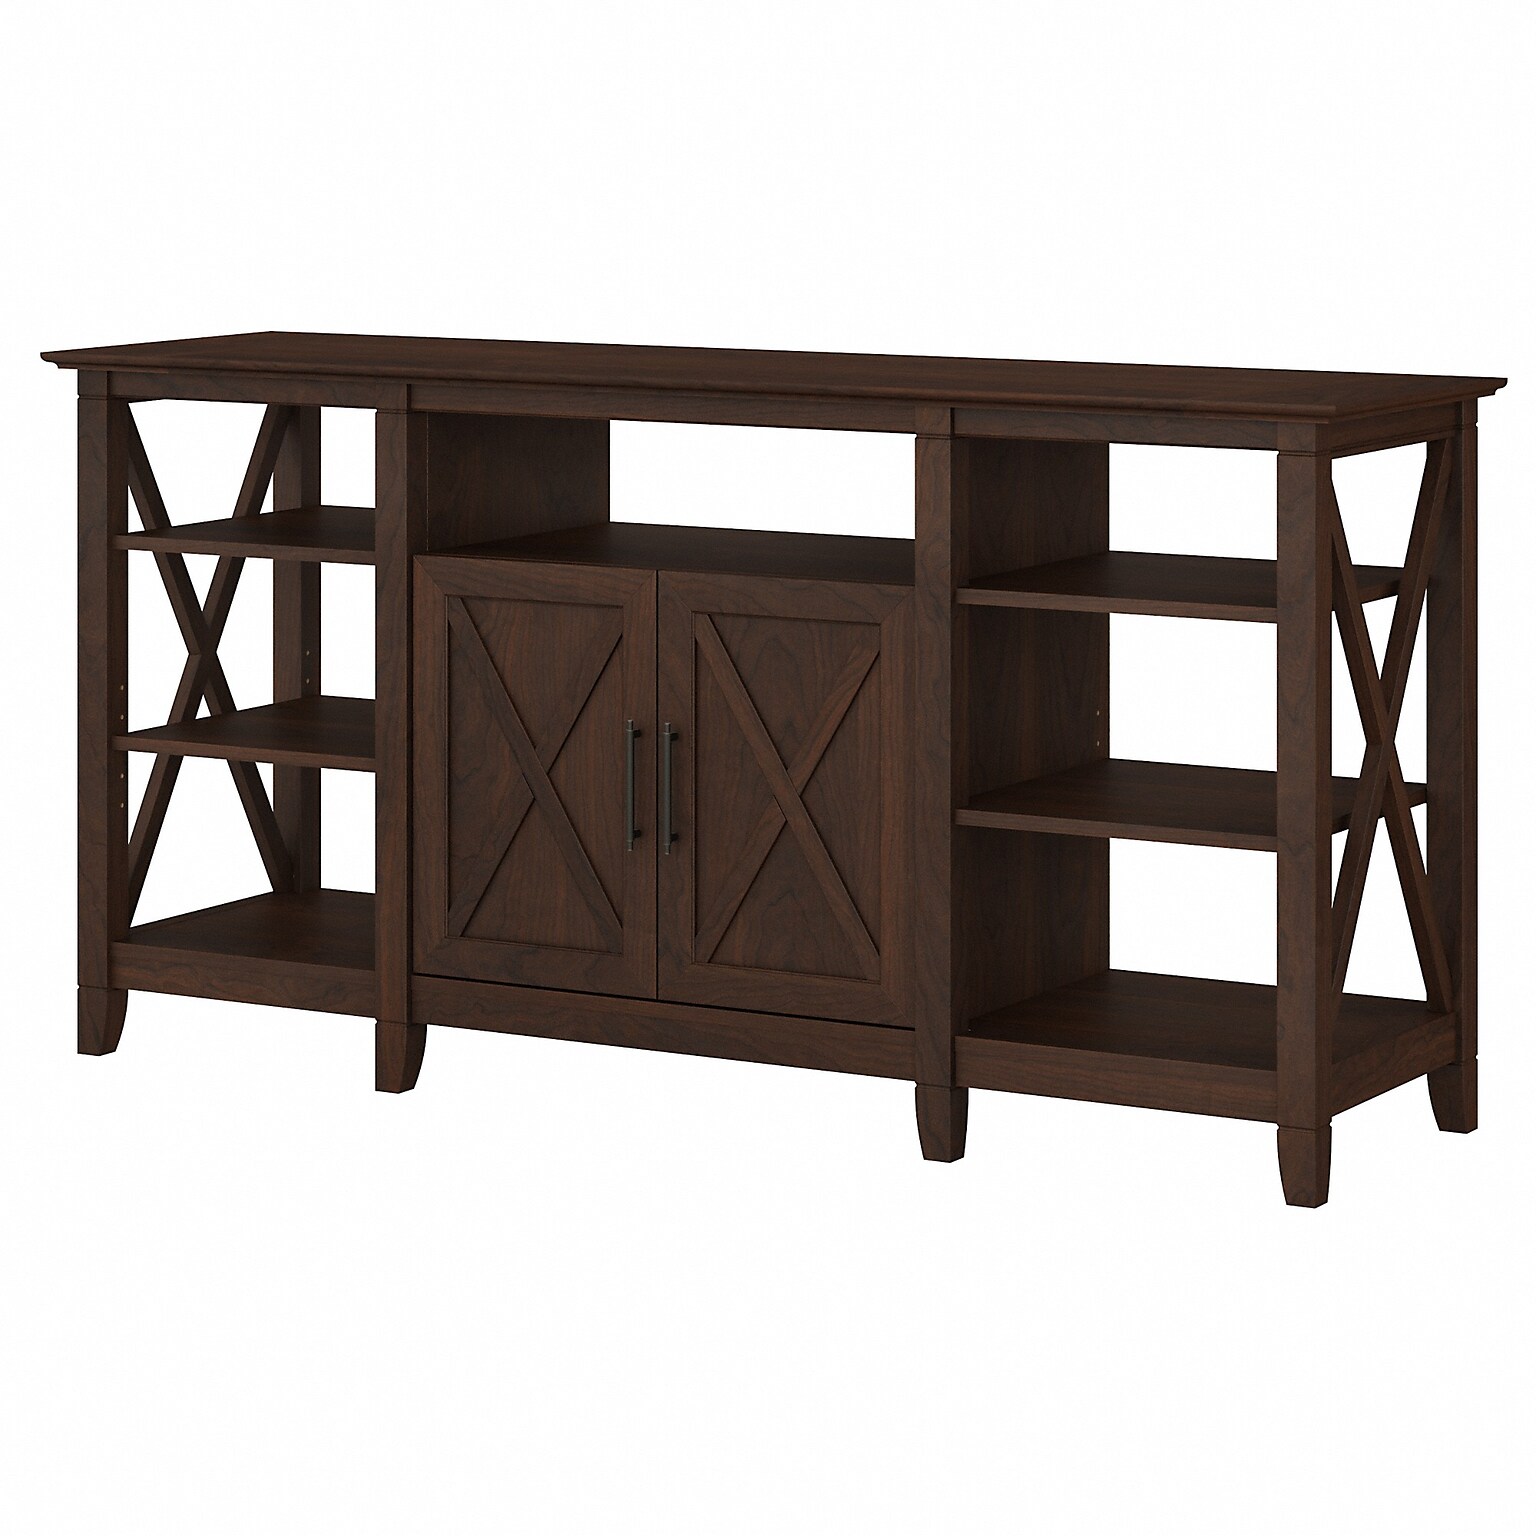 Bush Furniture Key West Manufactured Wood Console TV Stand, Screens up to 65, Bing Cherry (KWV160BC-03)